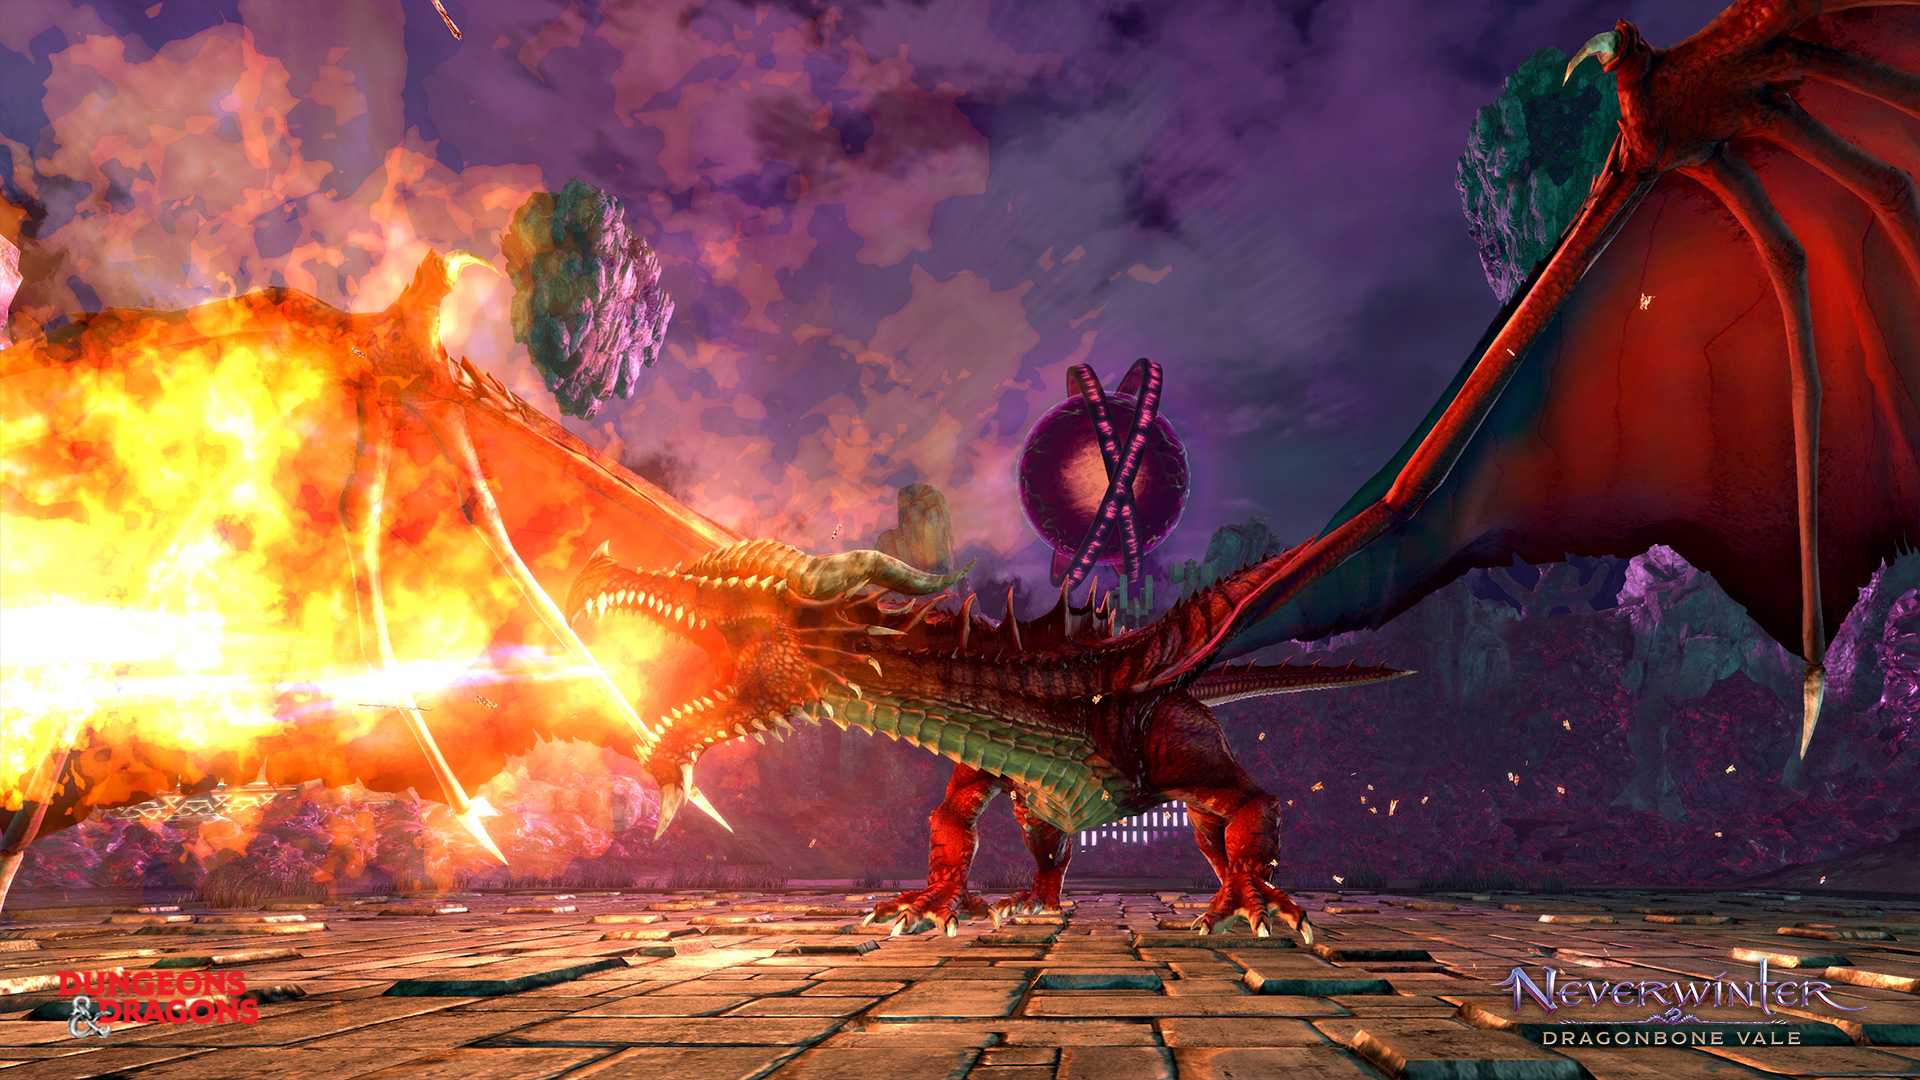 Neverwinter Previews Epic Adventure With Brand New Dragon